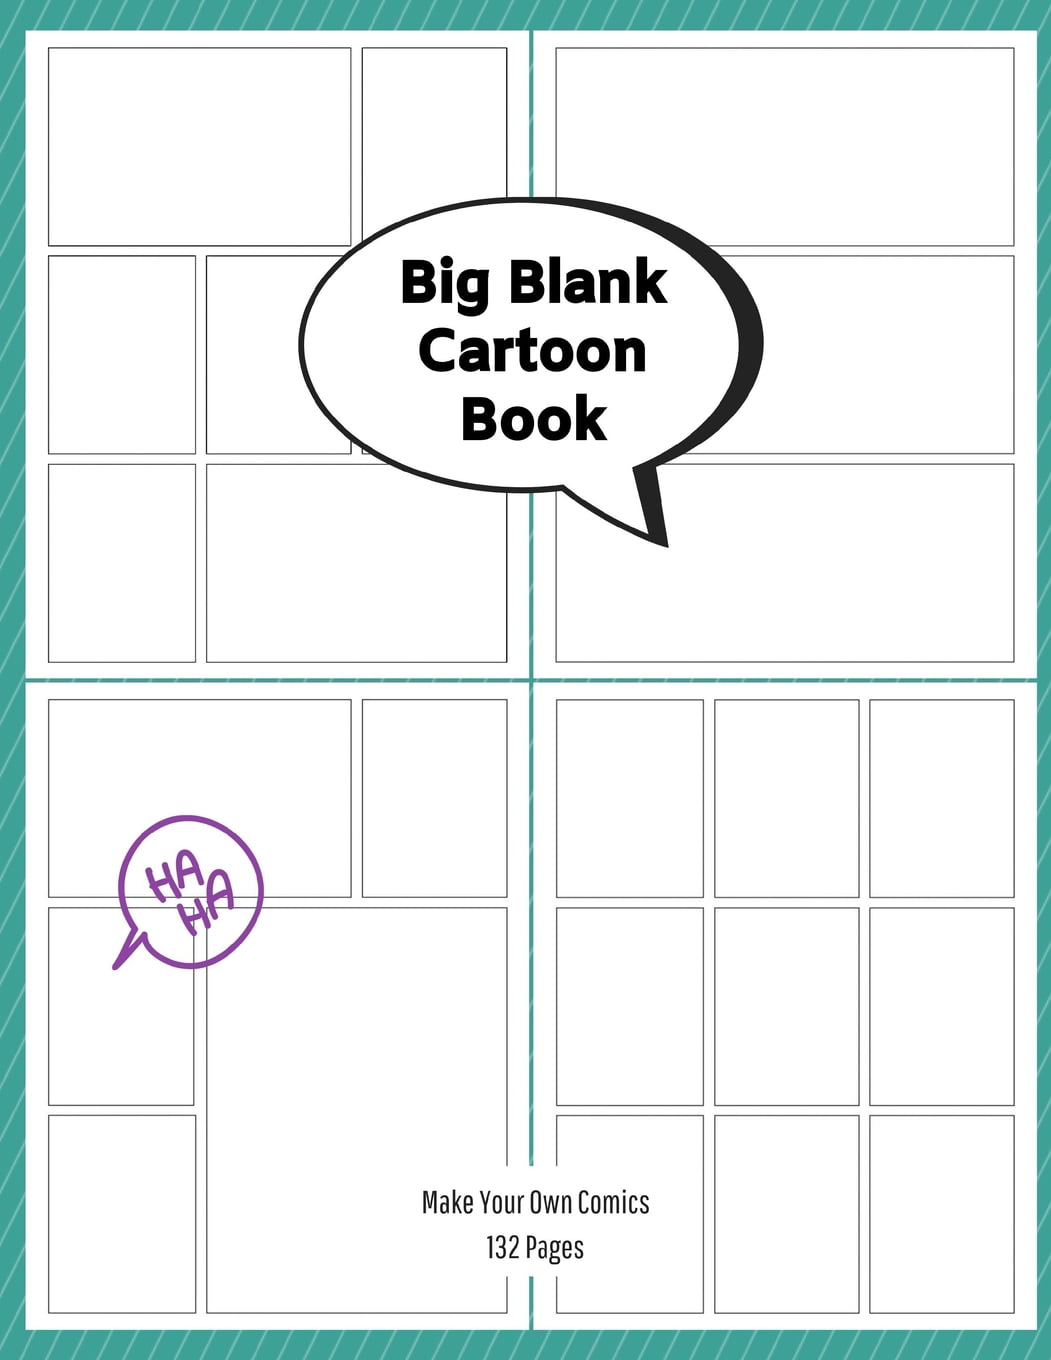 big-blank-cartoon-book-make-your-own-comics-large-sketchbook-with